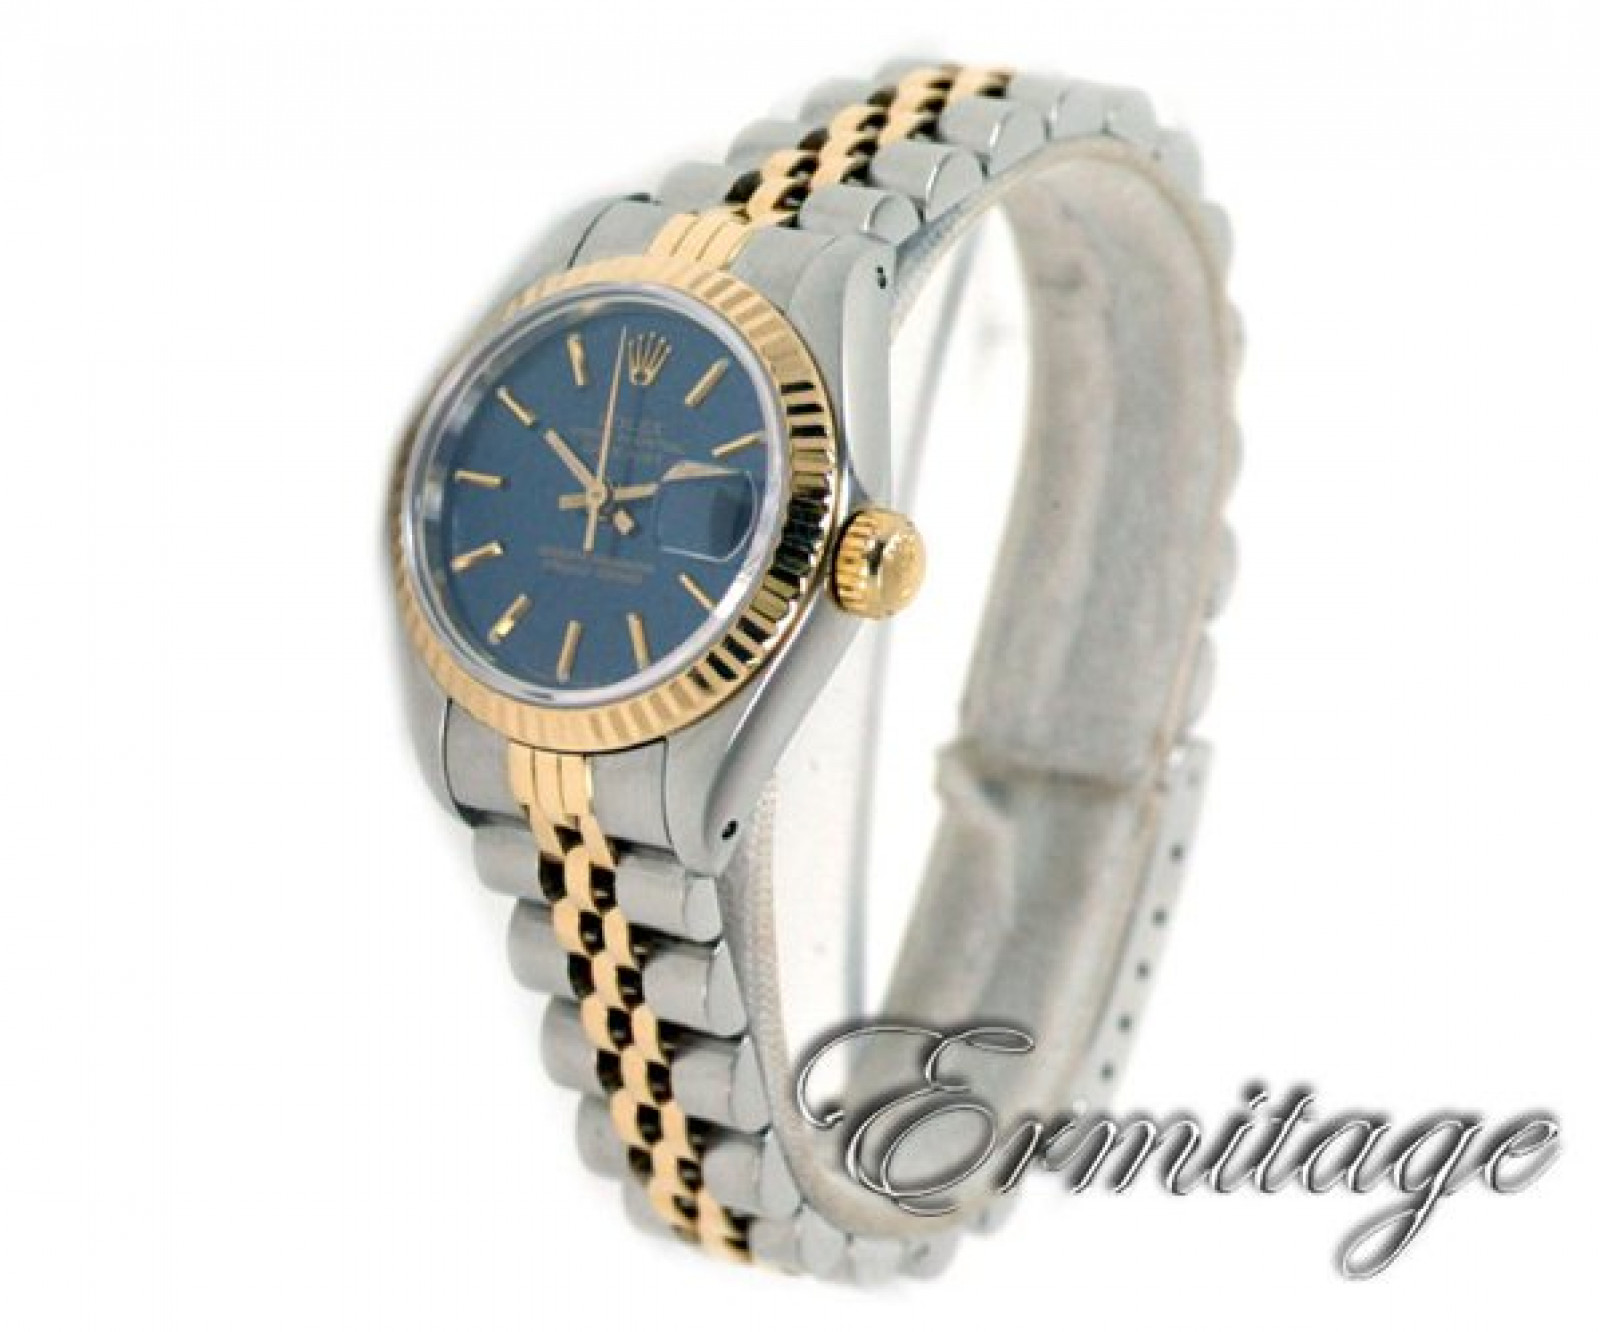 Used Authentic Rolex Datejust 69173 Gold & Steel